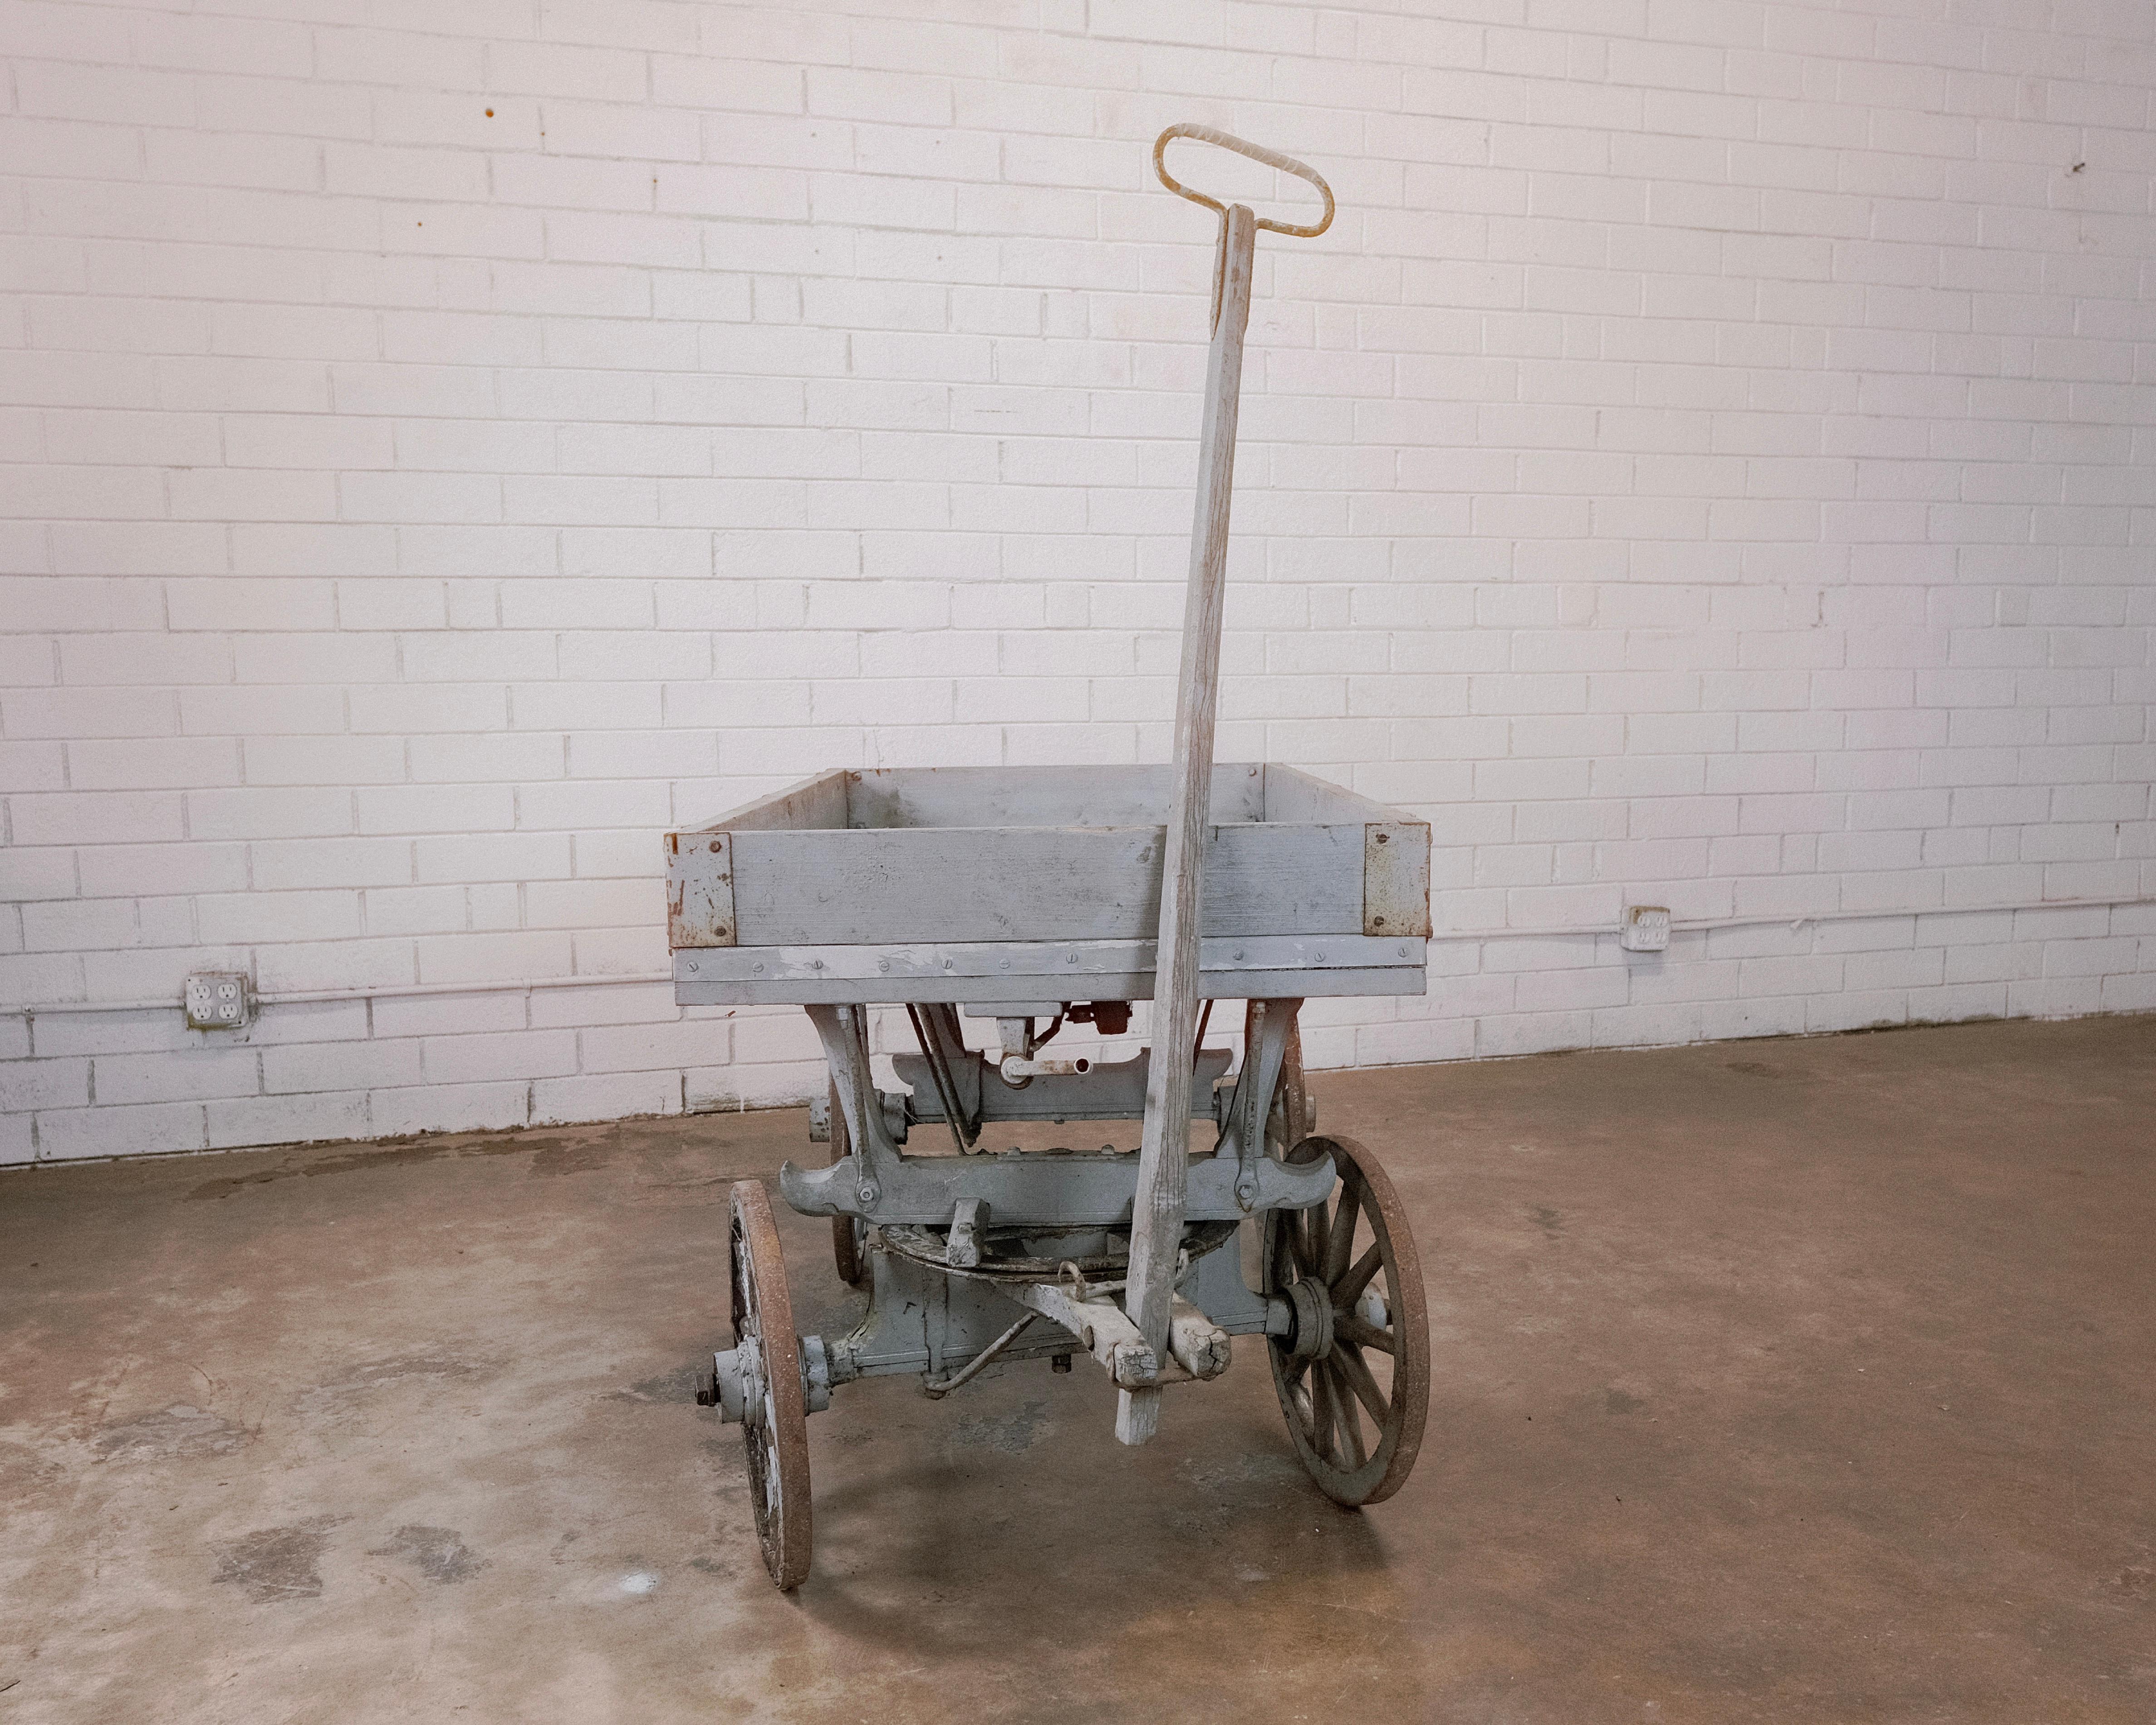 Step back in time with this charming Wheeled Hand Cart, a delightful relic from the 19th century. Crafted with rugged practicality in mind, this cart features sturdy wooden construction and the addition of wheels for added mobility, making it a